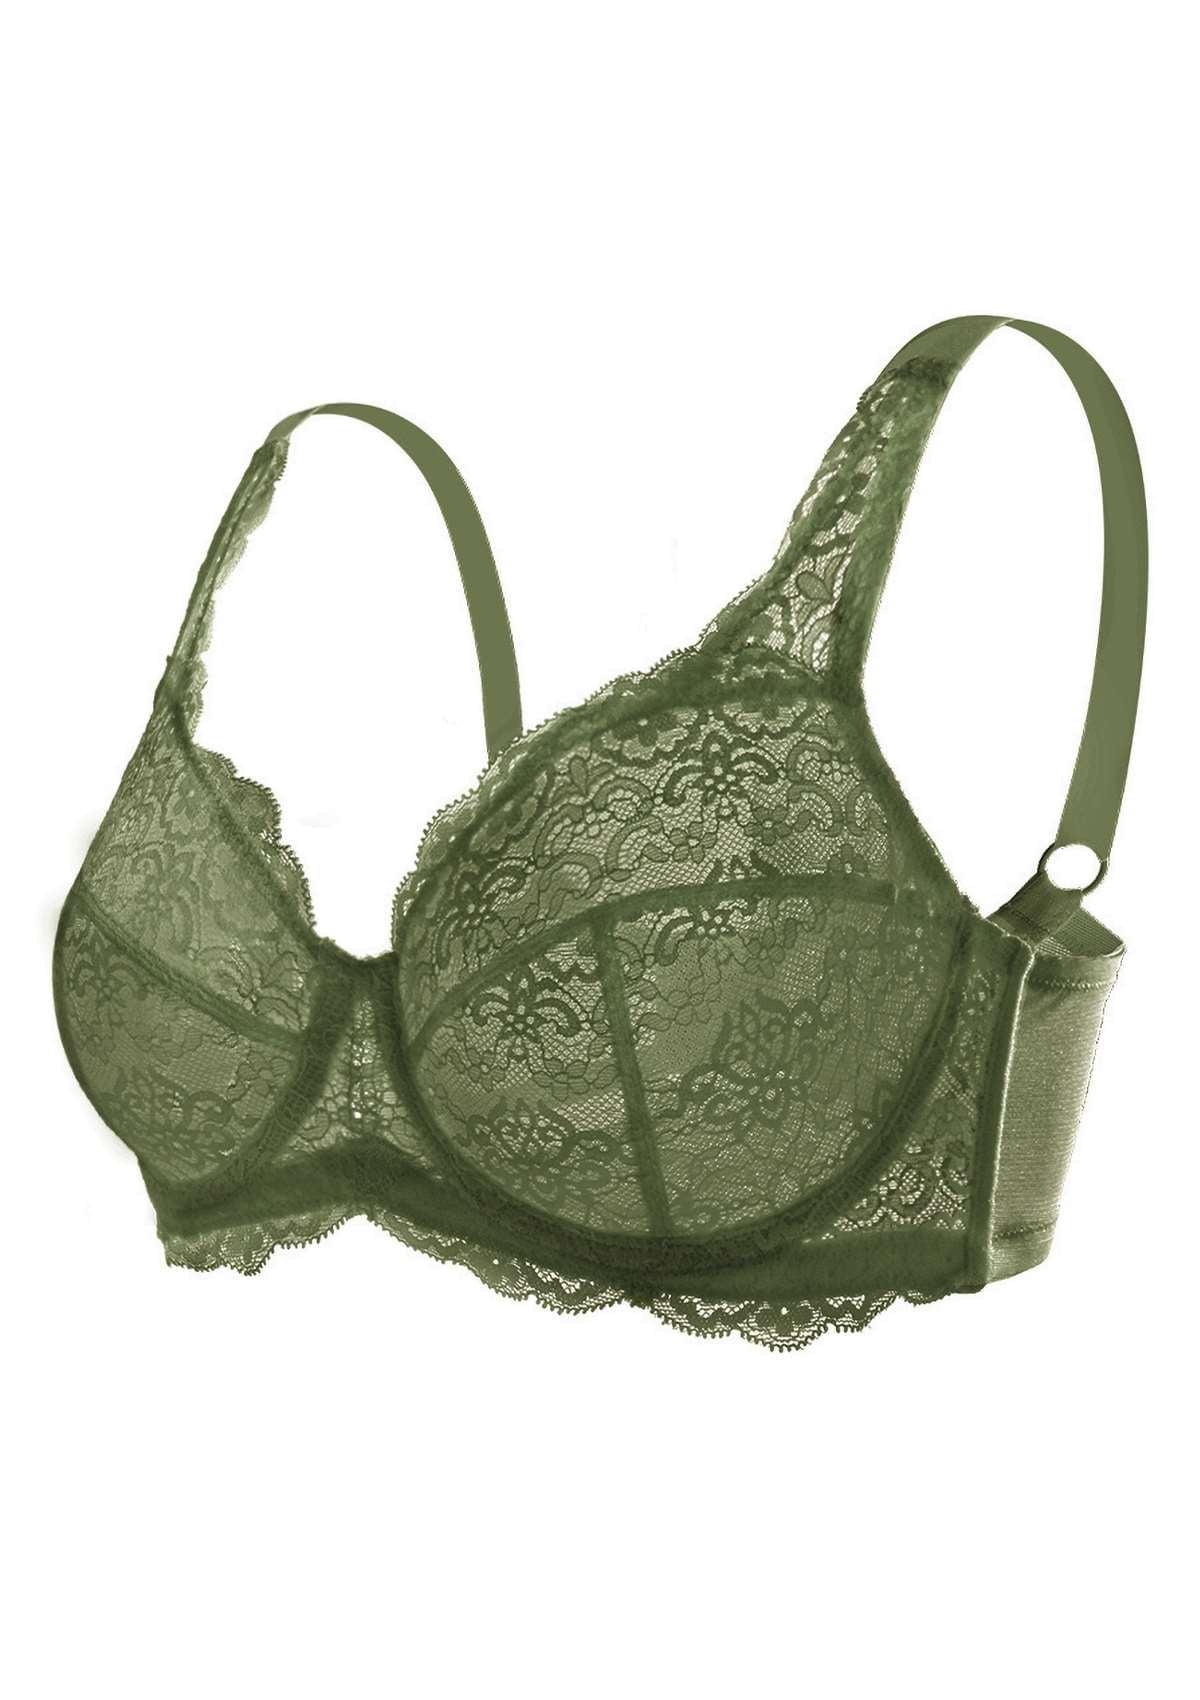 HSIA All-Over Floral Lace Unlined Bra: Minimizer Bra For Heavy Breasts - Dark Green / 34 / C